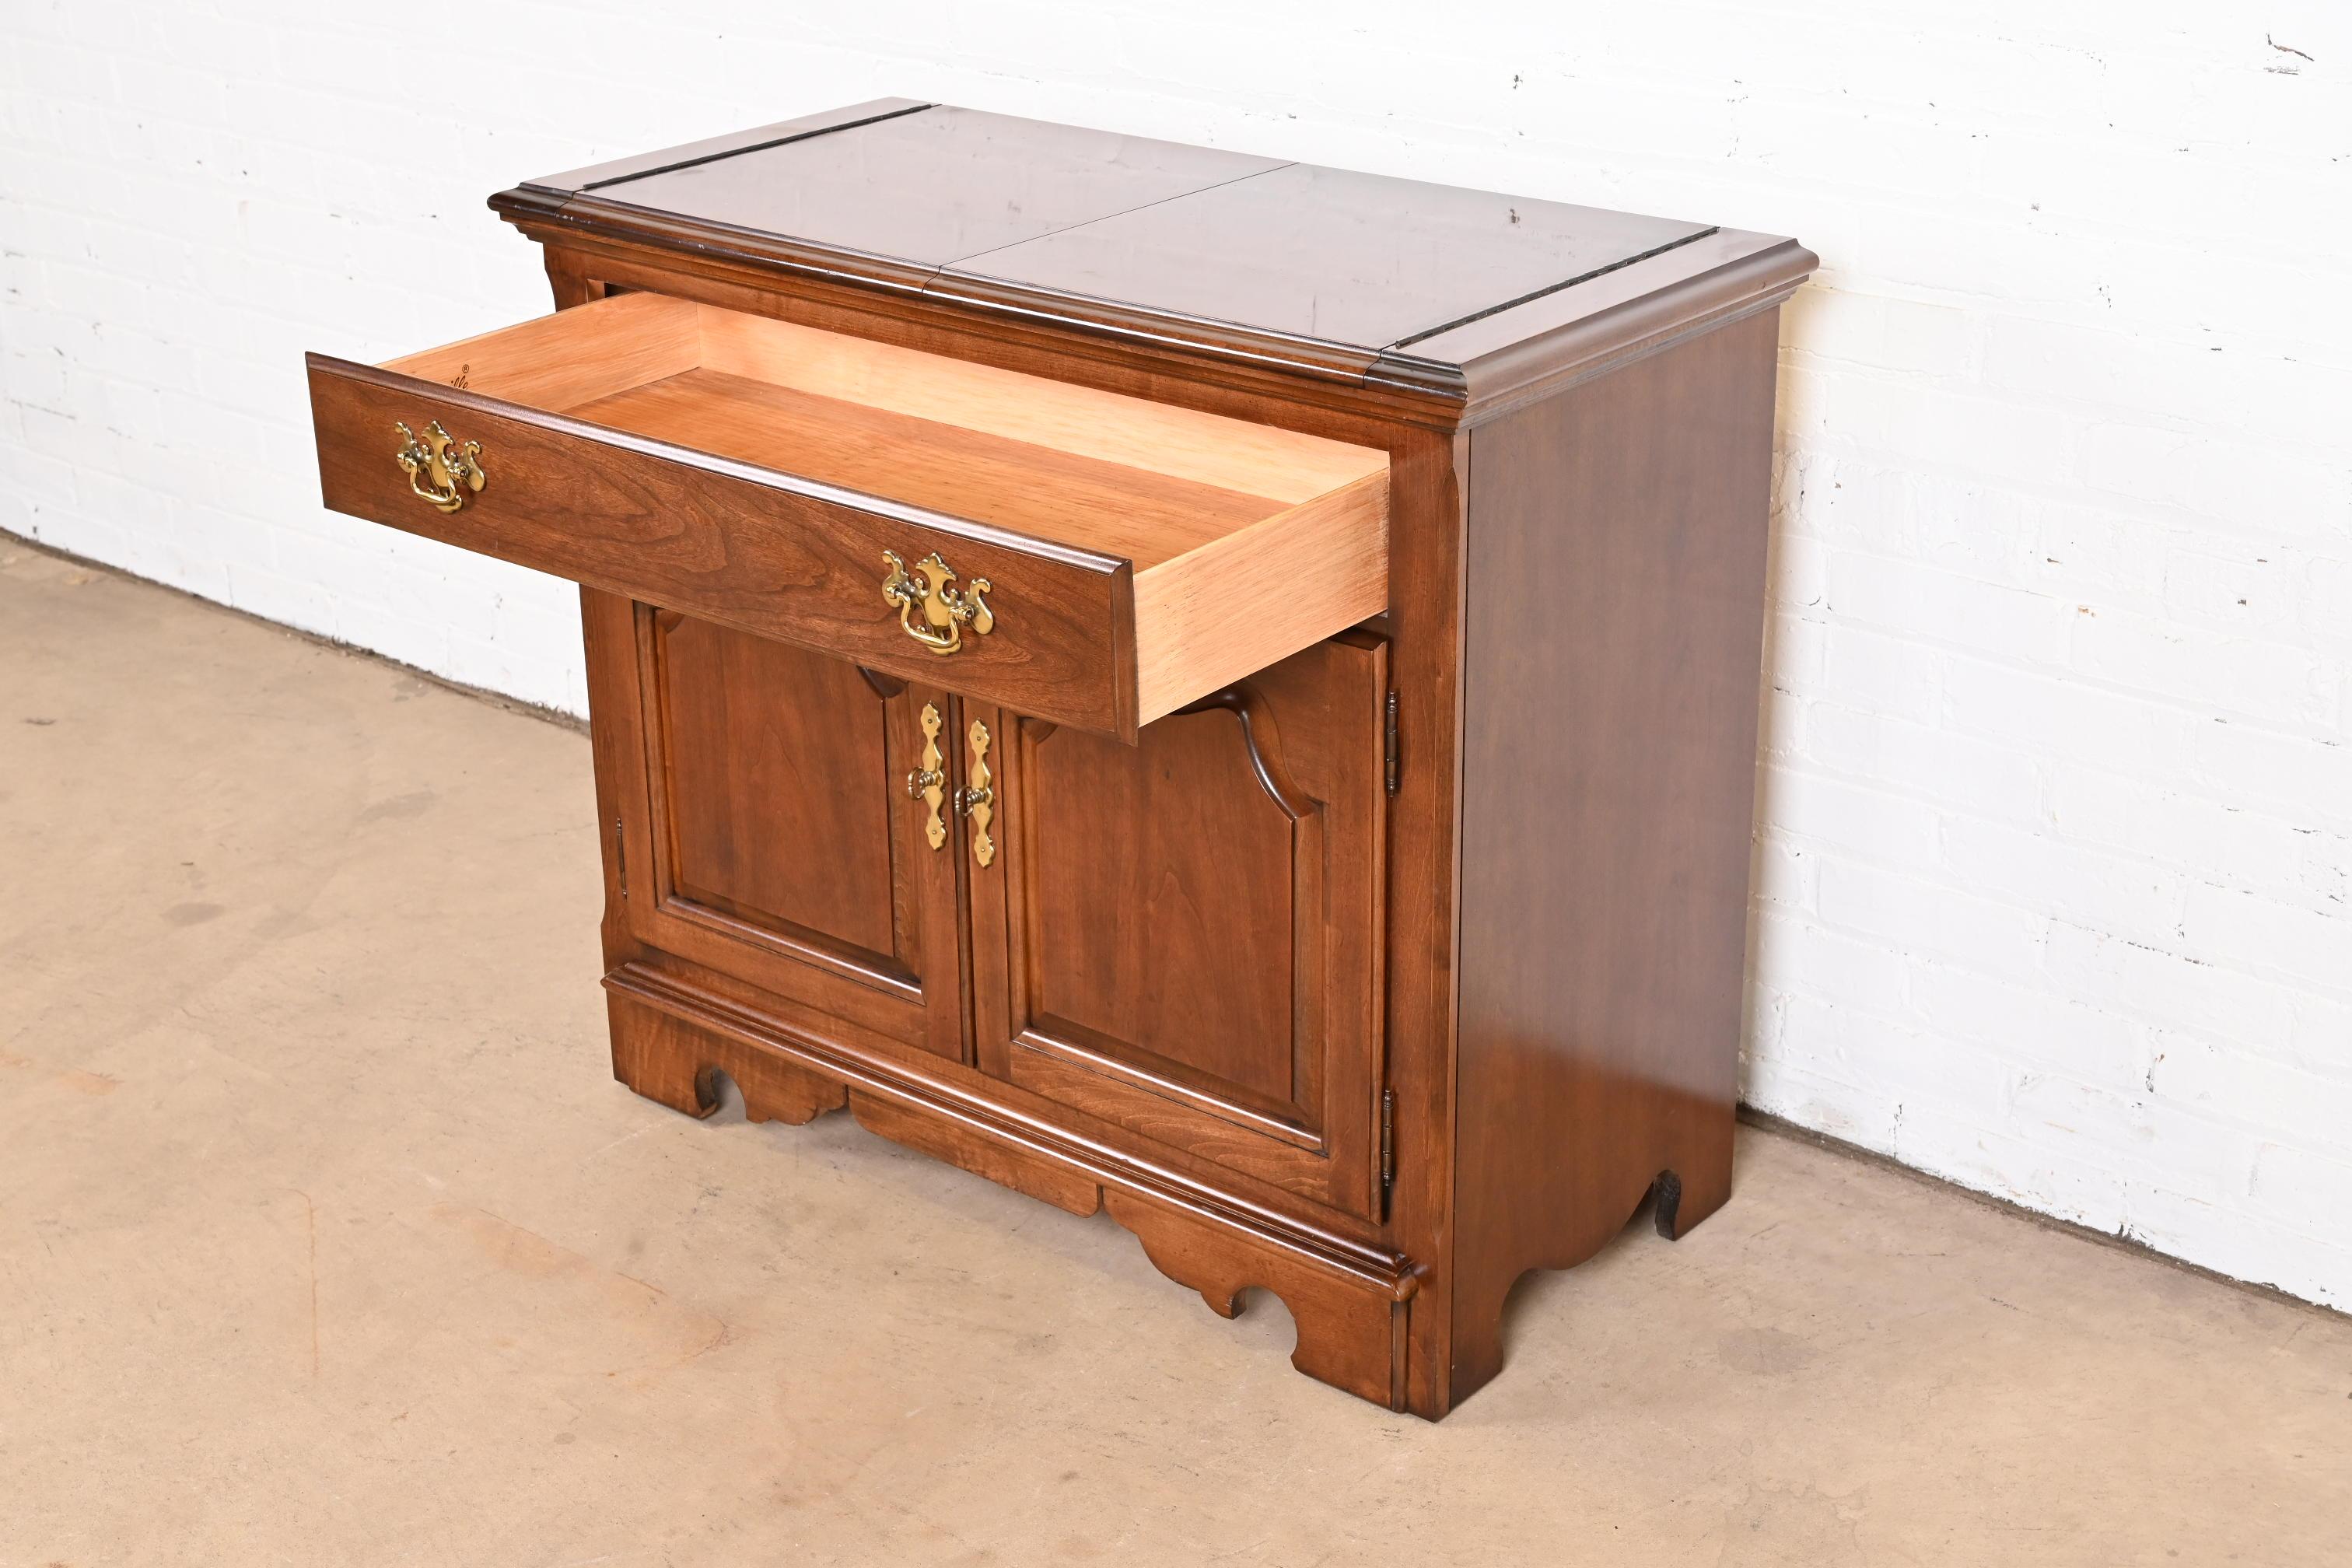 Late 20th Century Thomasville Georgian Solid Cherry Wood Flip Top Server or Bar Cabinet For Sale